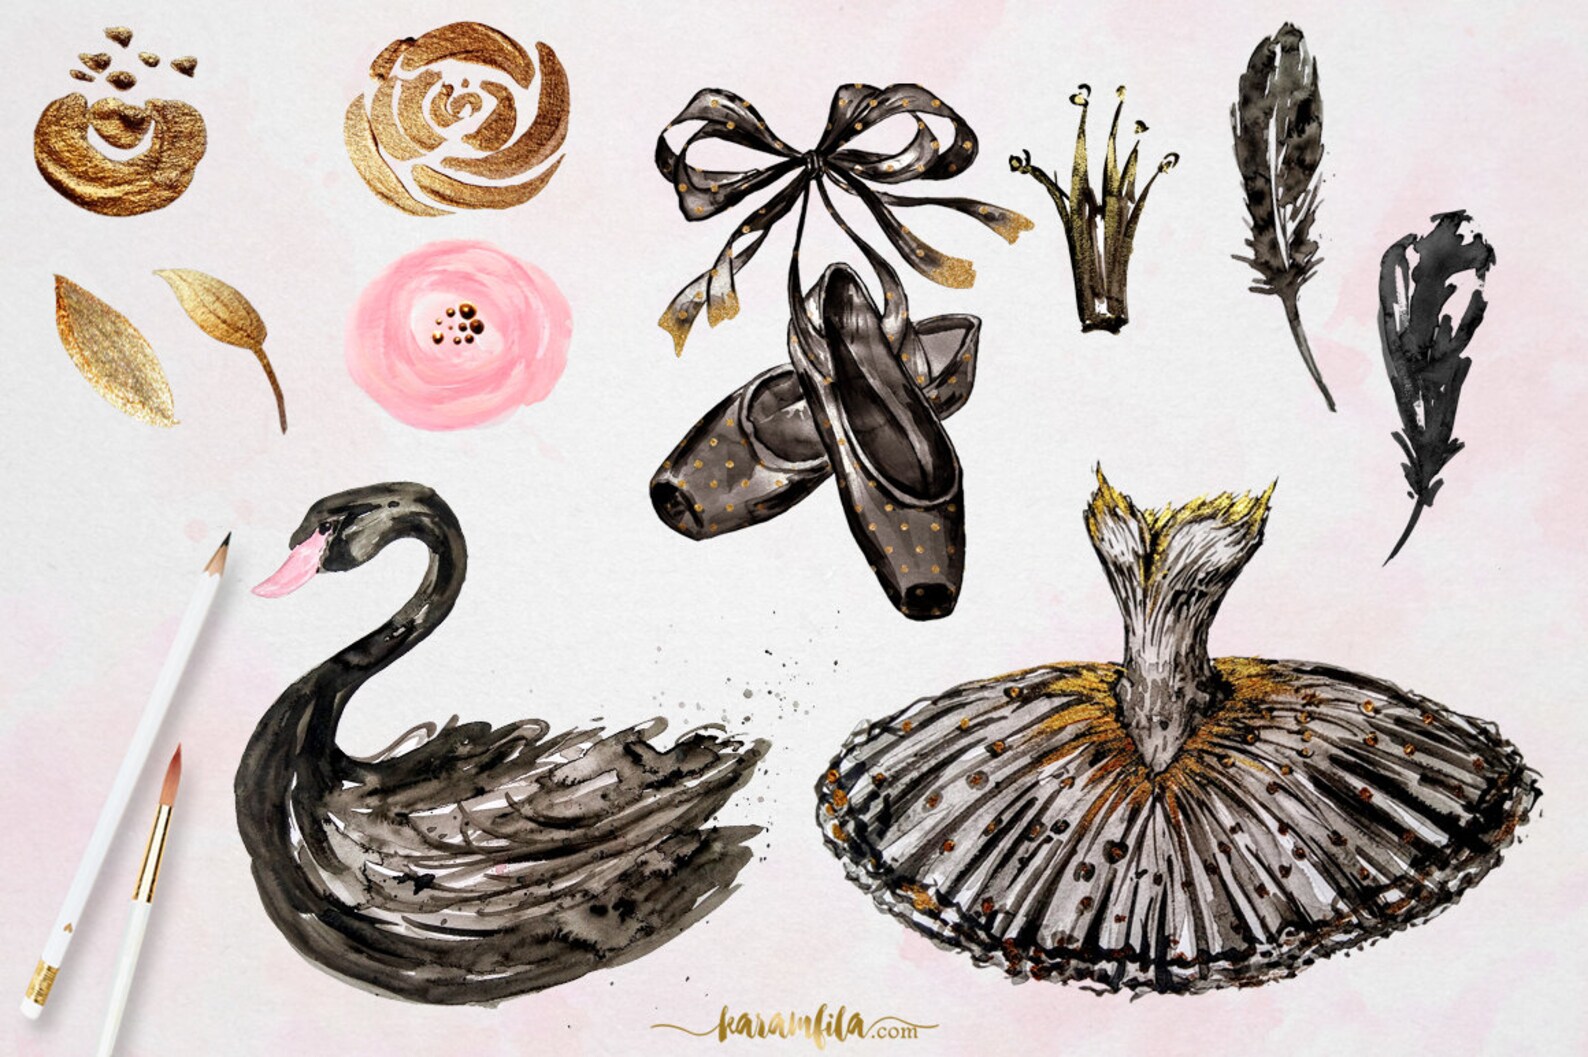 ballerina clipart black swan lake watercolor ballet illustration handpainted pointe shoes tutu dress feather crown gold glitter